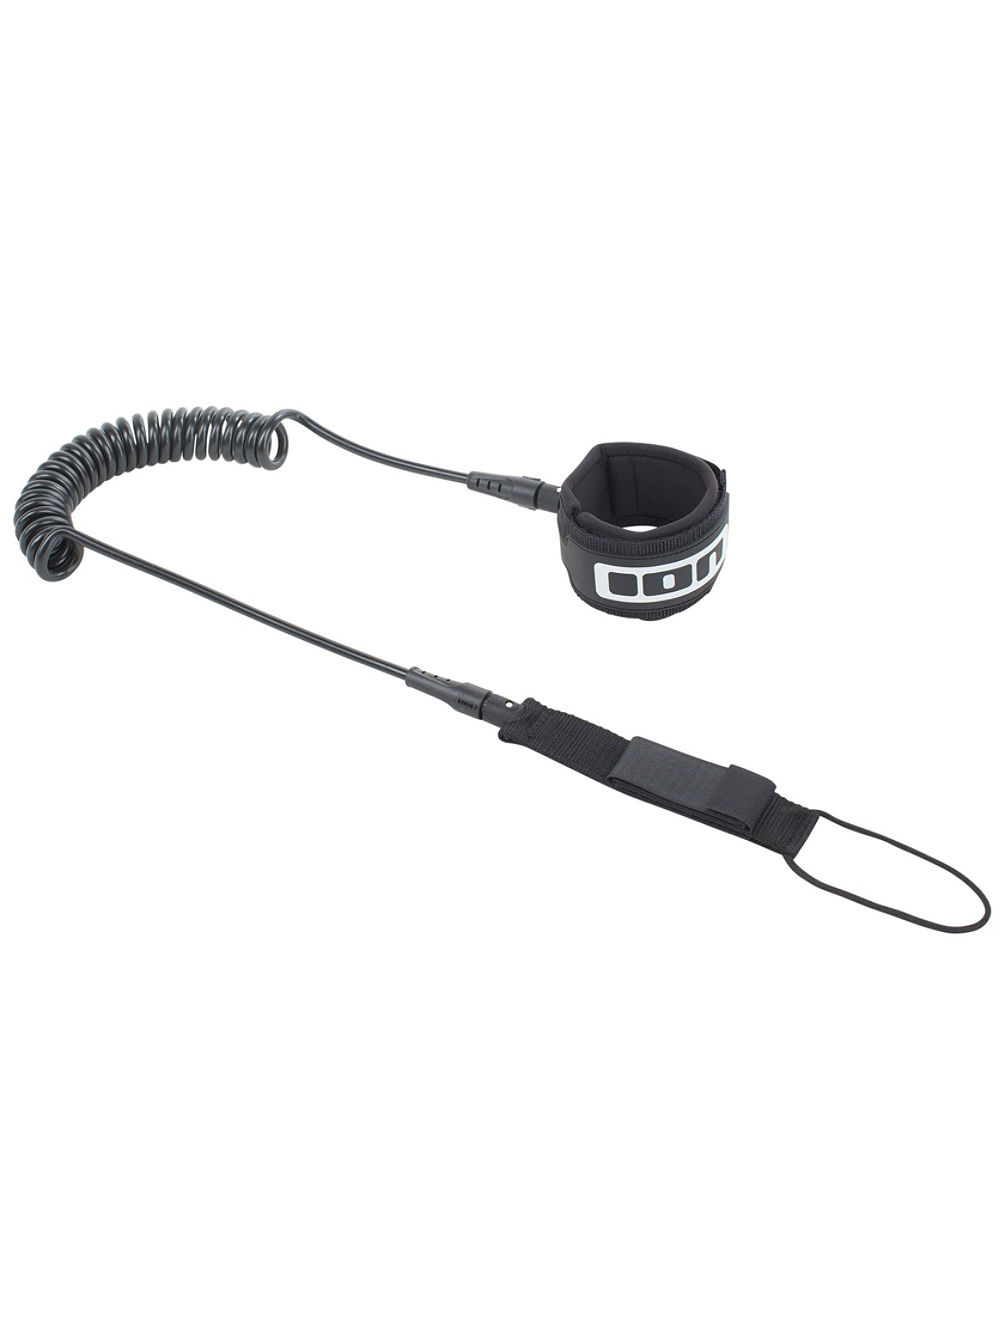 Sup Core Coiled 8&amp;#039; Leash